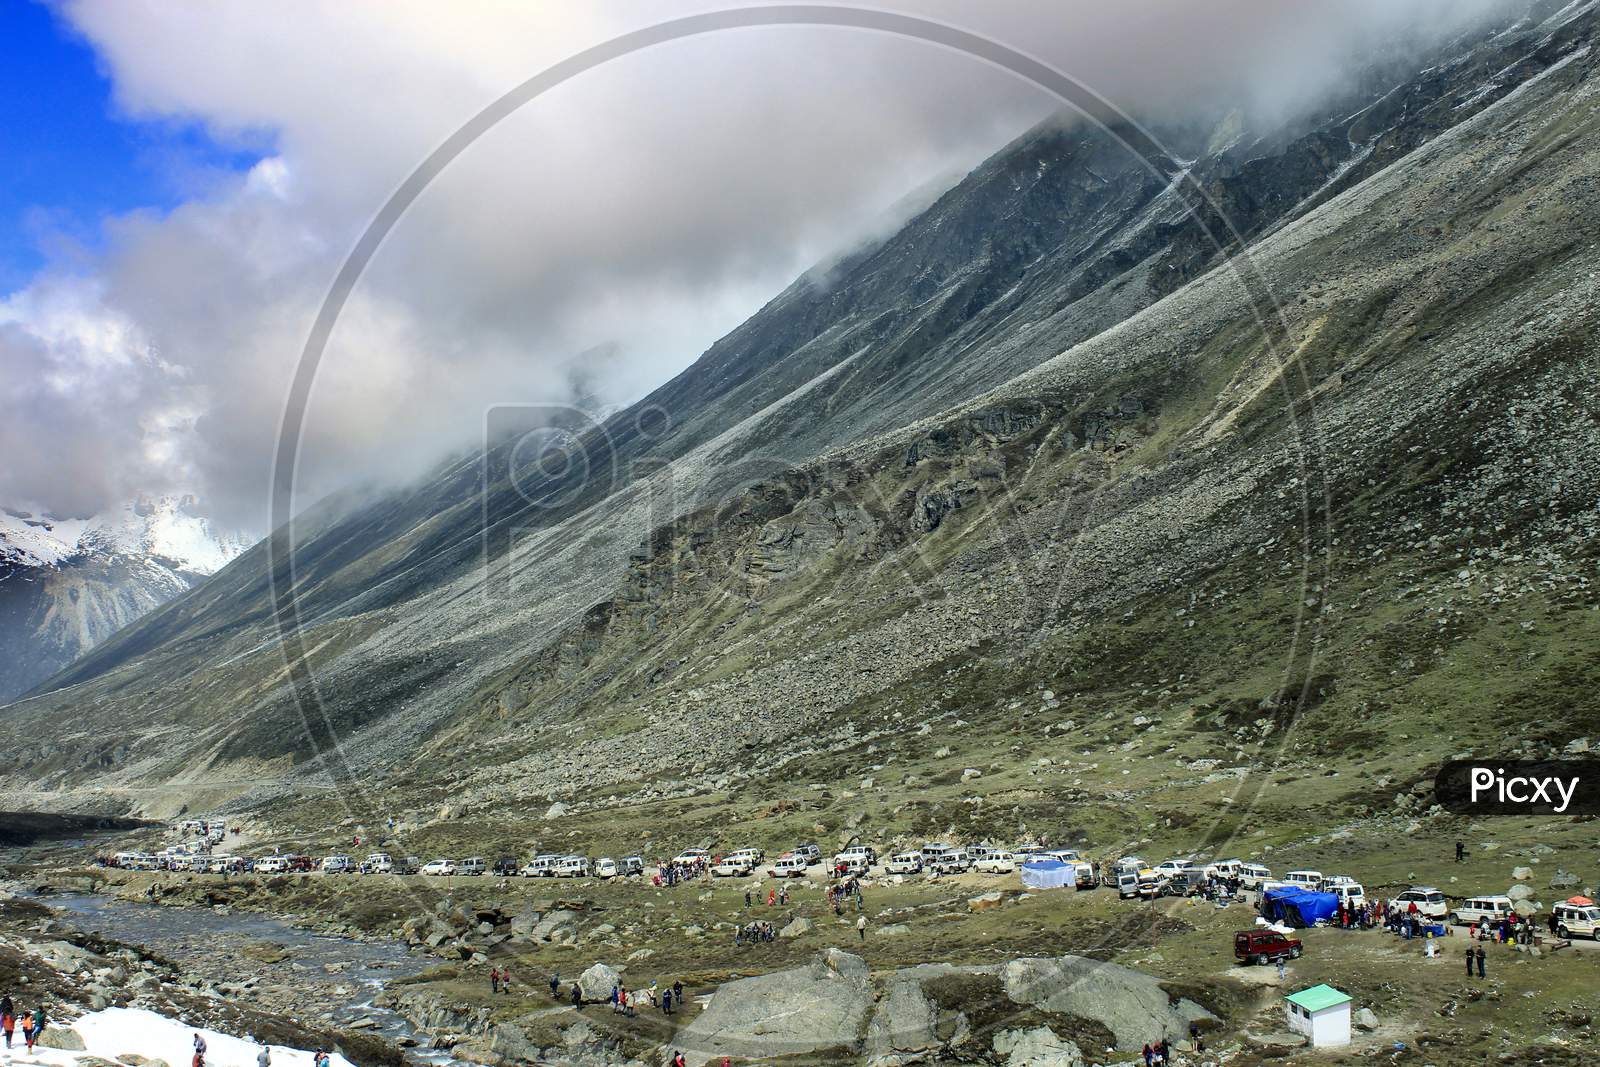 Huge Mountains of Sikkim with Vehicles in the foreground